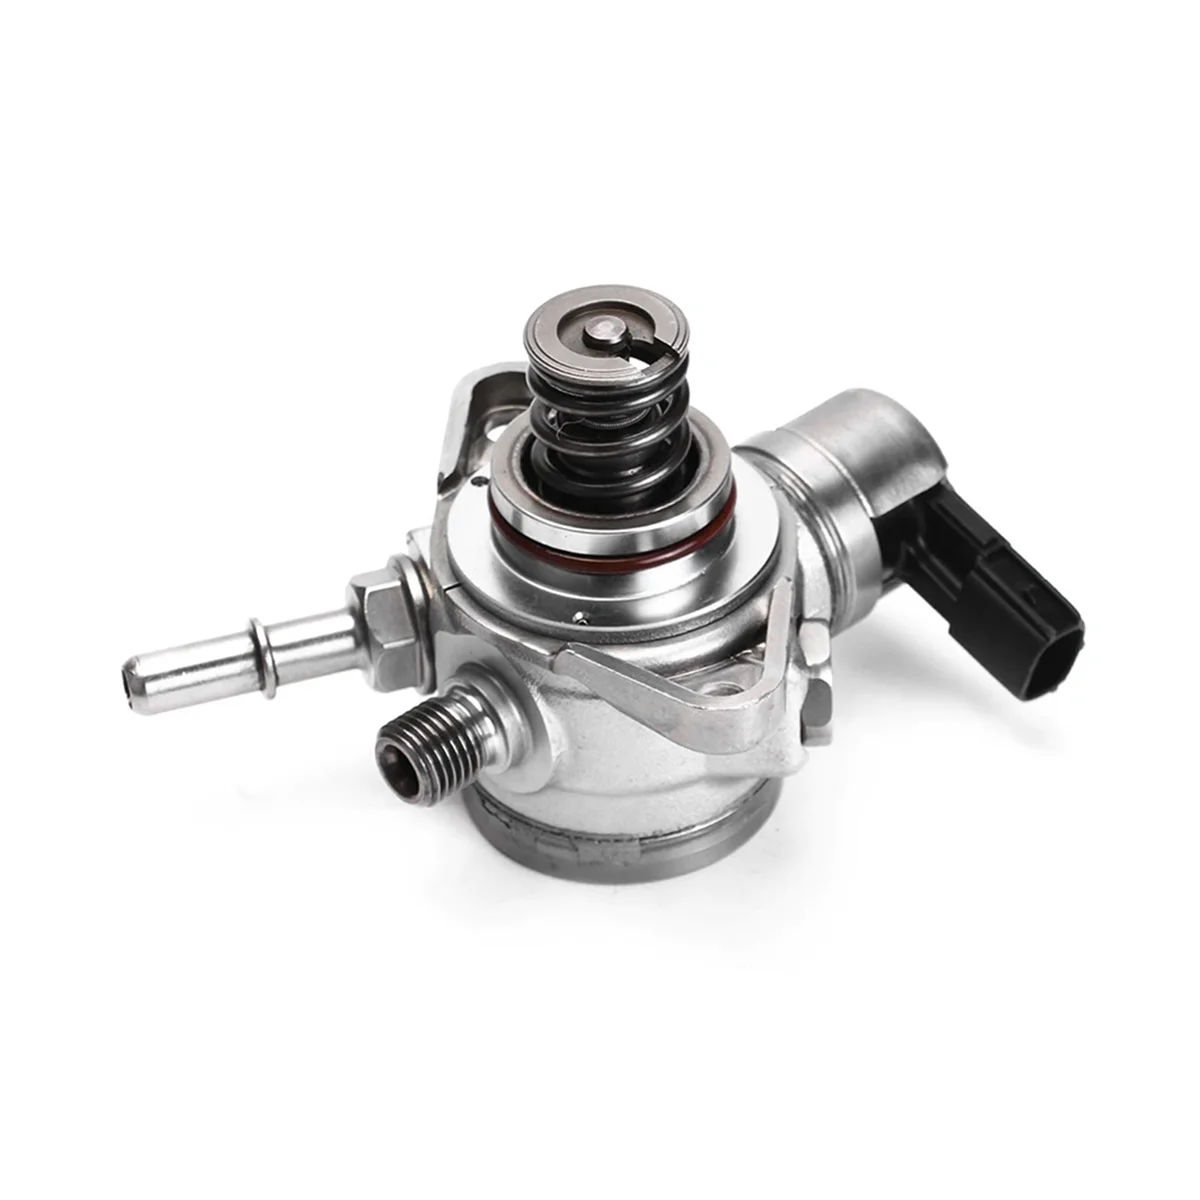 

BL3E-9D376-CH High Pressure Fuel Pump Turbocharged Car for Ford 3.5L 2011-2015 F-150 Ecoboost